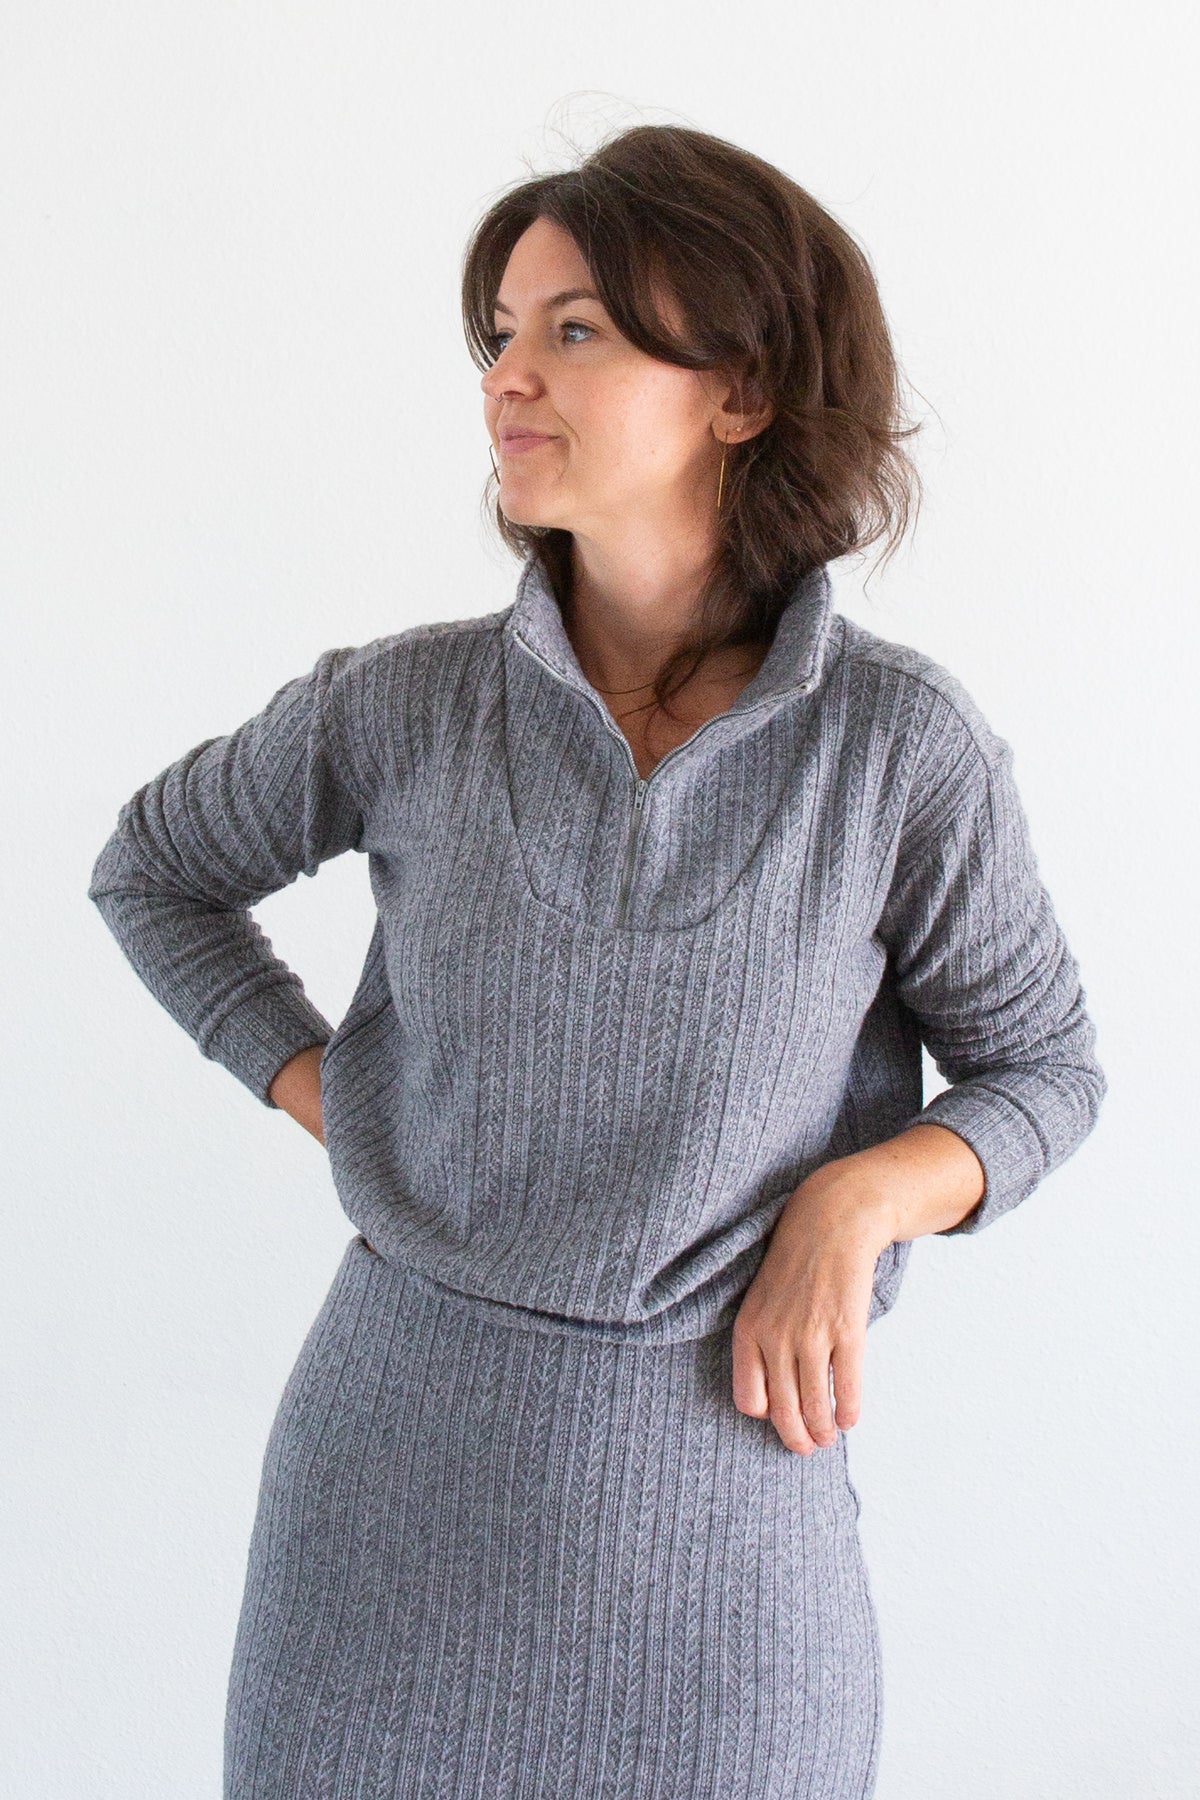 Hive Pullover Sewing Pattern – Allie Olson Sewing Patterns